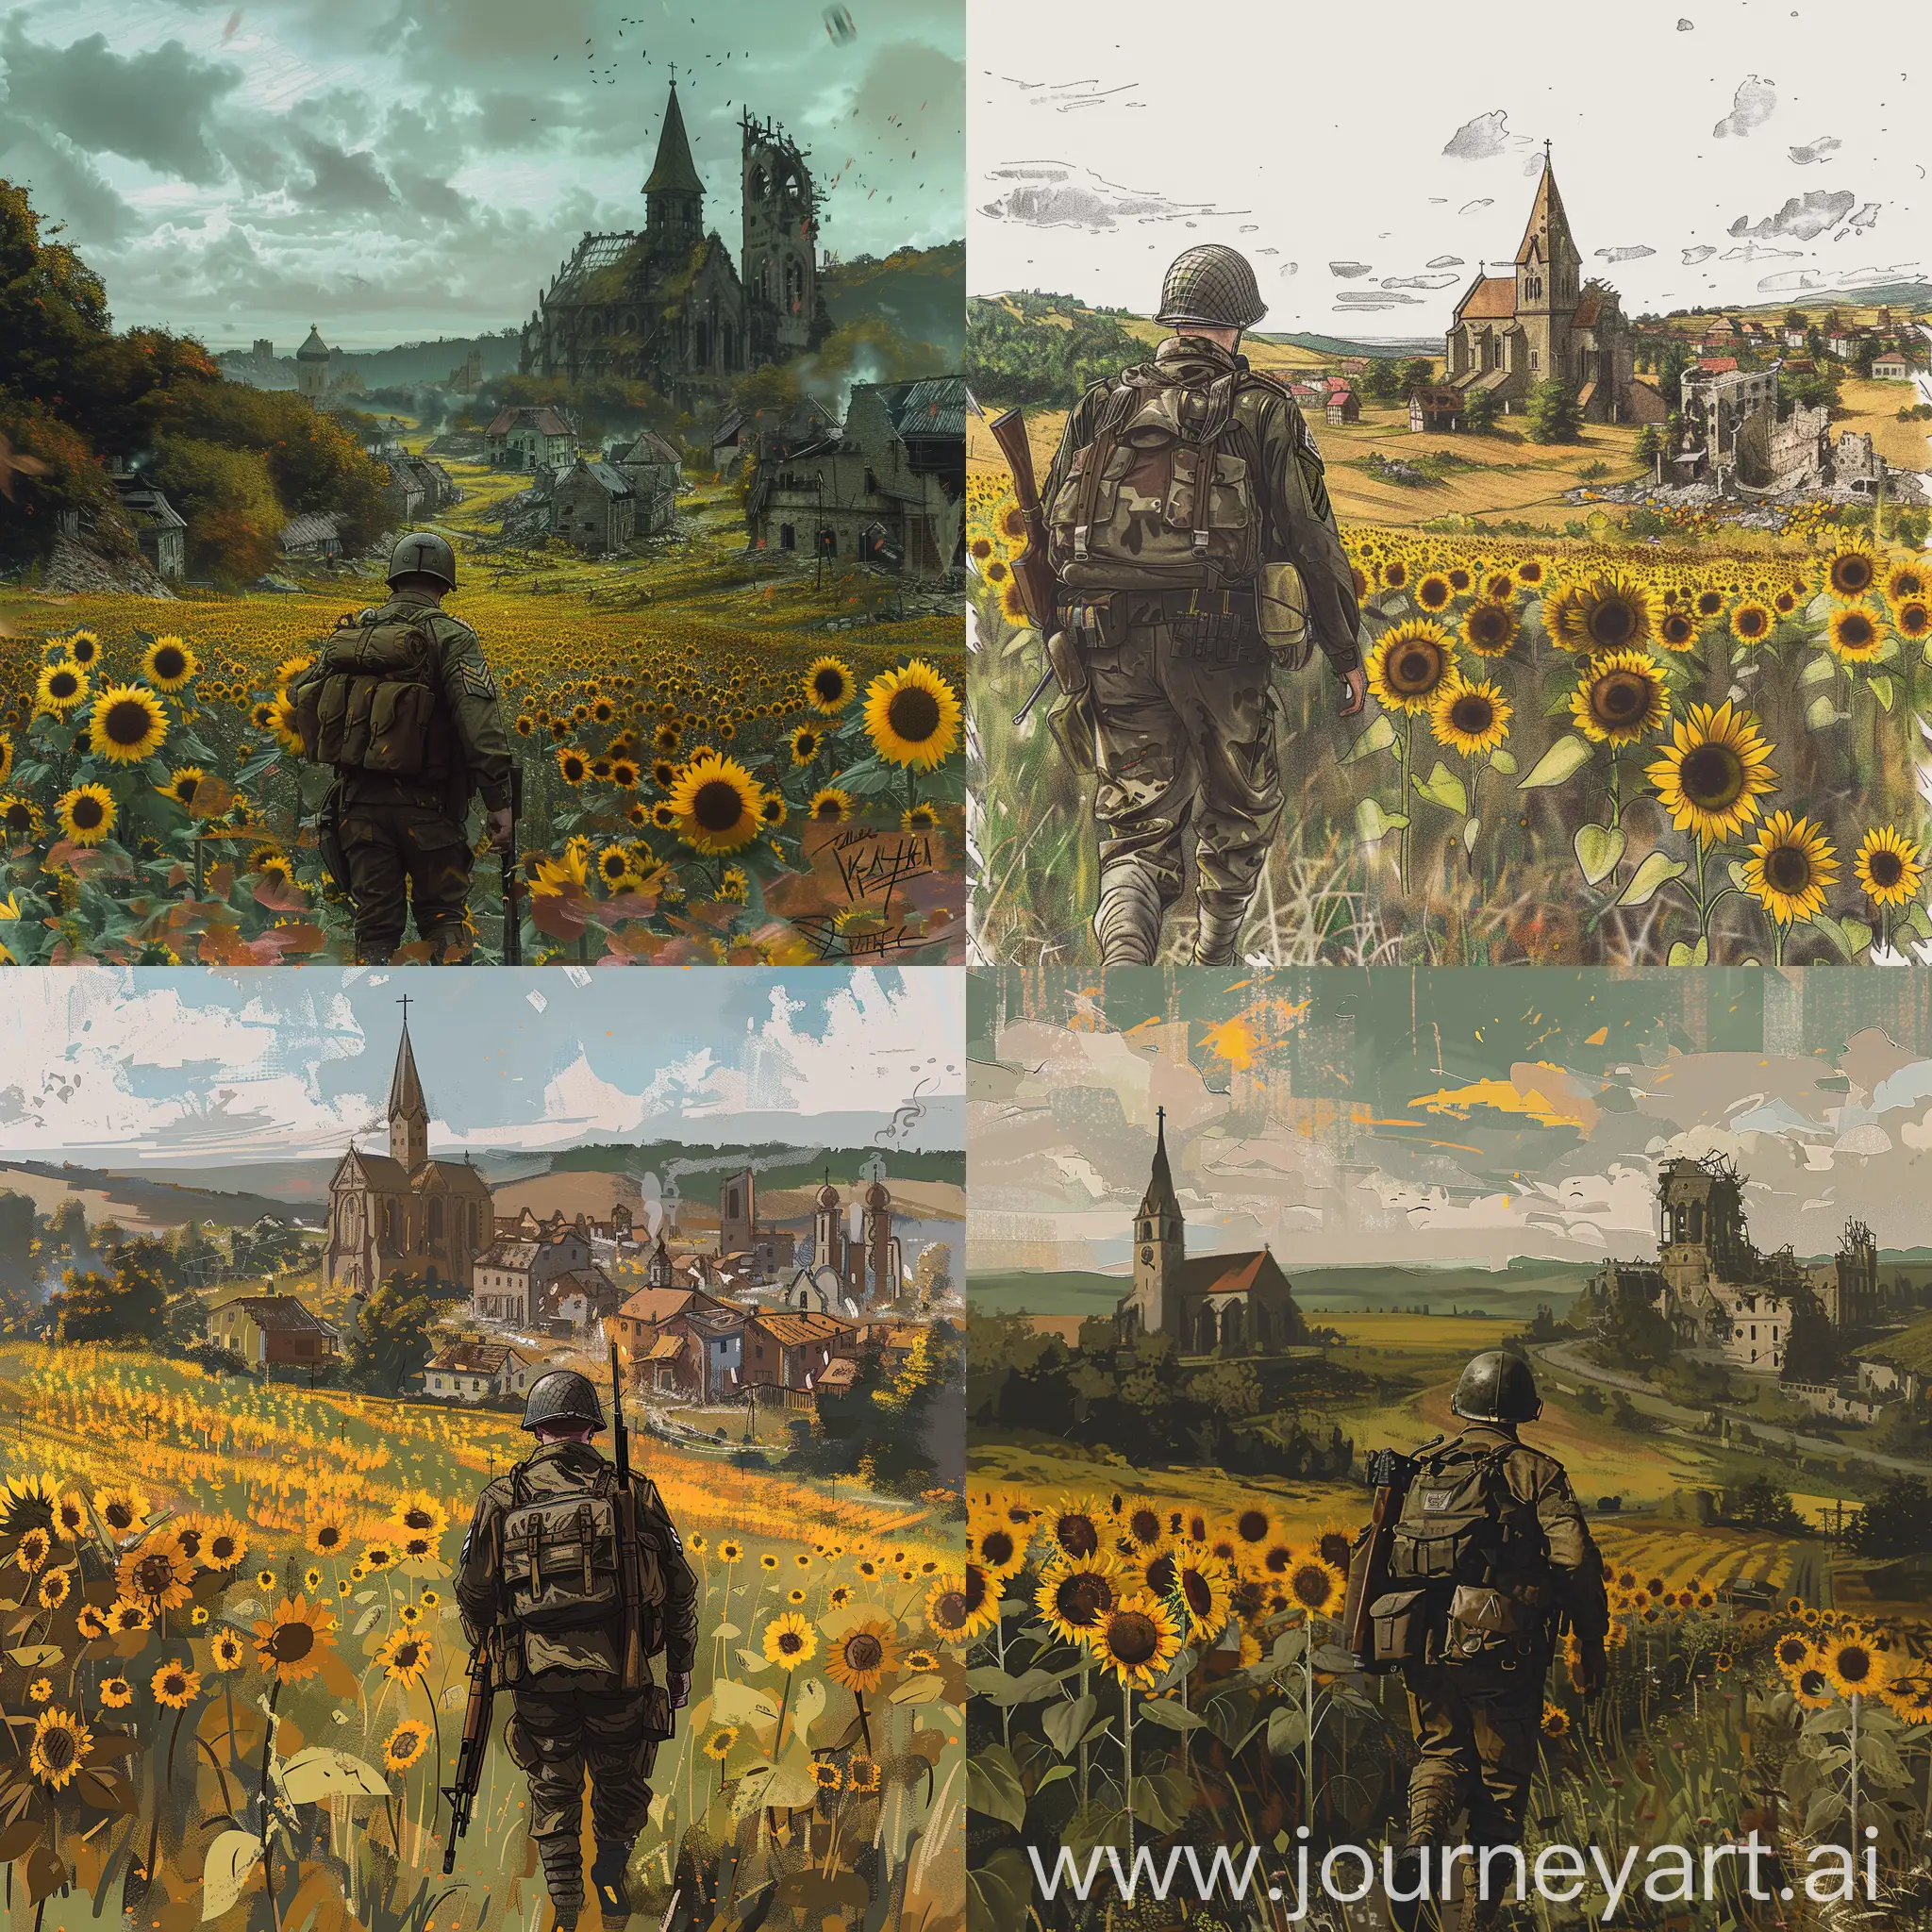 WWII-Soldier-Amid-Sunflower-Field-and-Dilapidated-Church-in-Digital-Doodle-Style